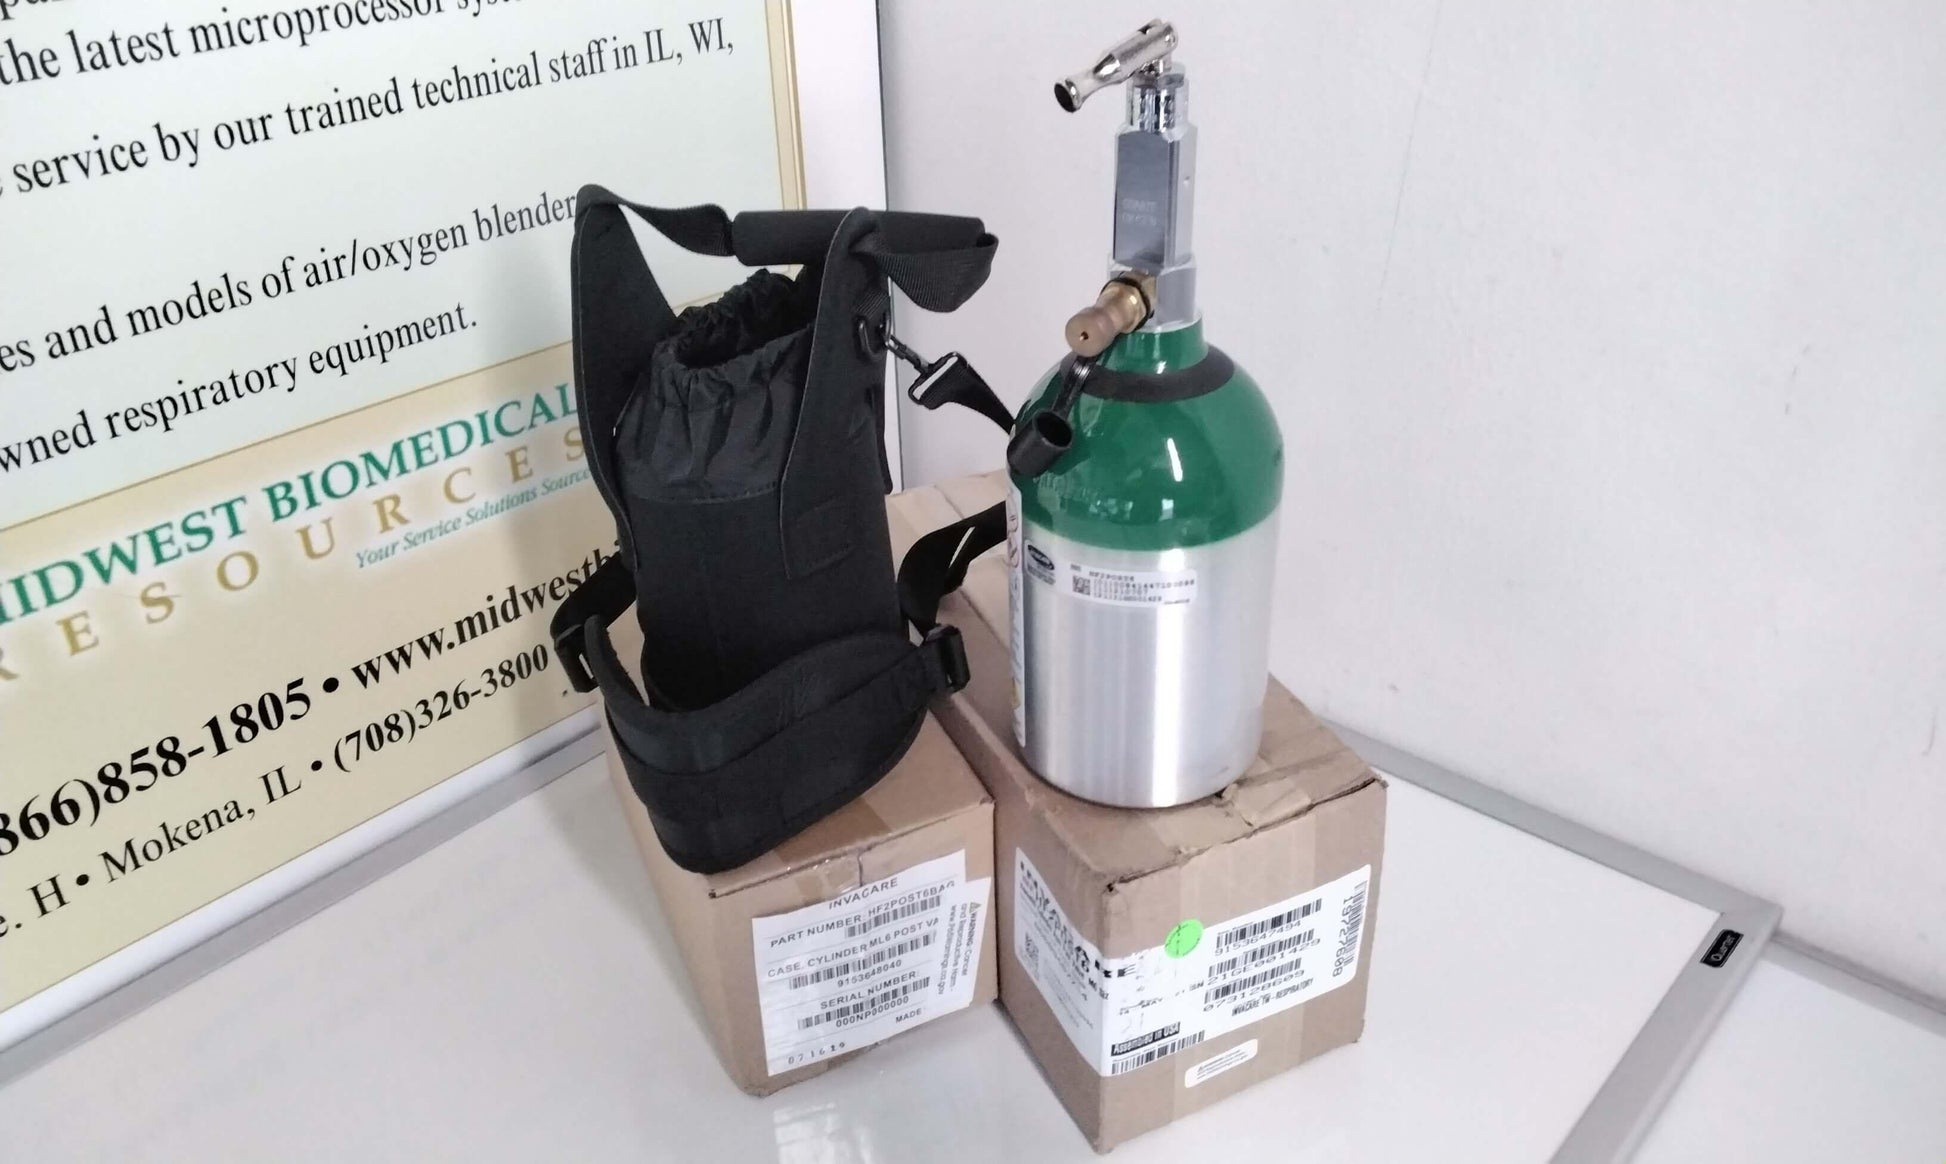 NEW Invacare ML6 Post Valve Oxygen Cylinder Tank and Carrying Bag HF2POST6KIT with Free Shipping and Warranty - MBR Medicals